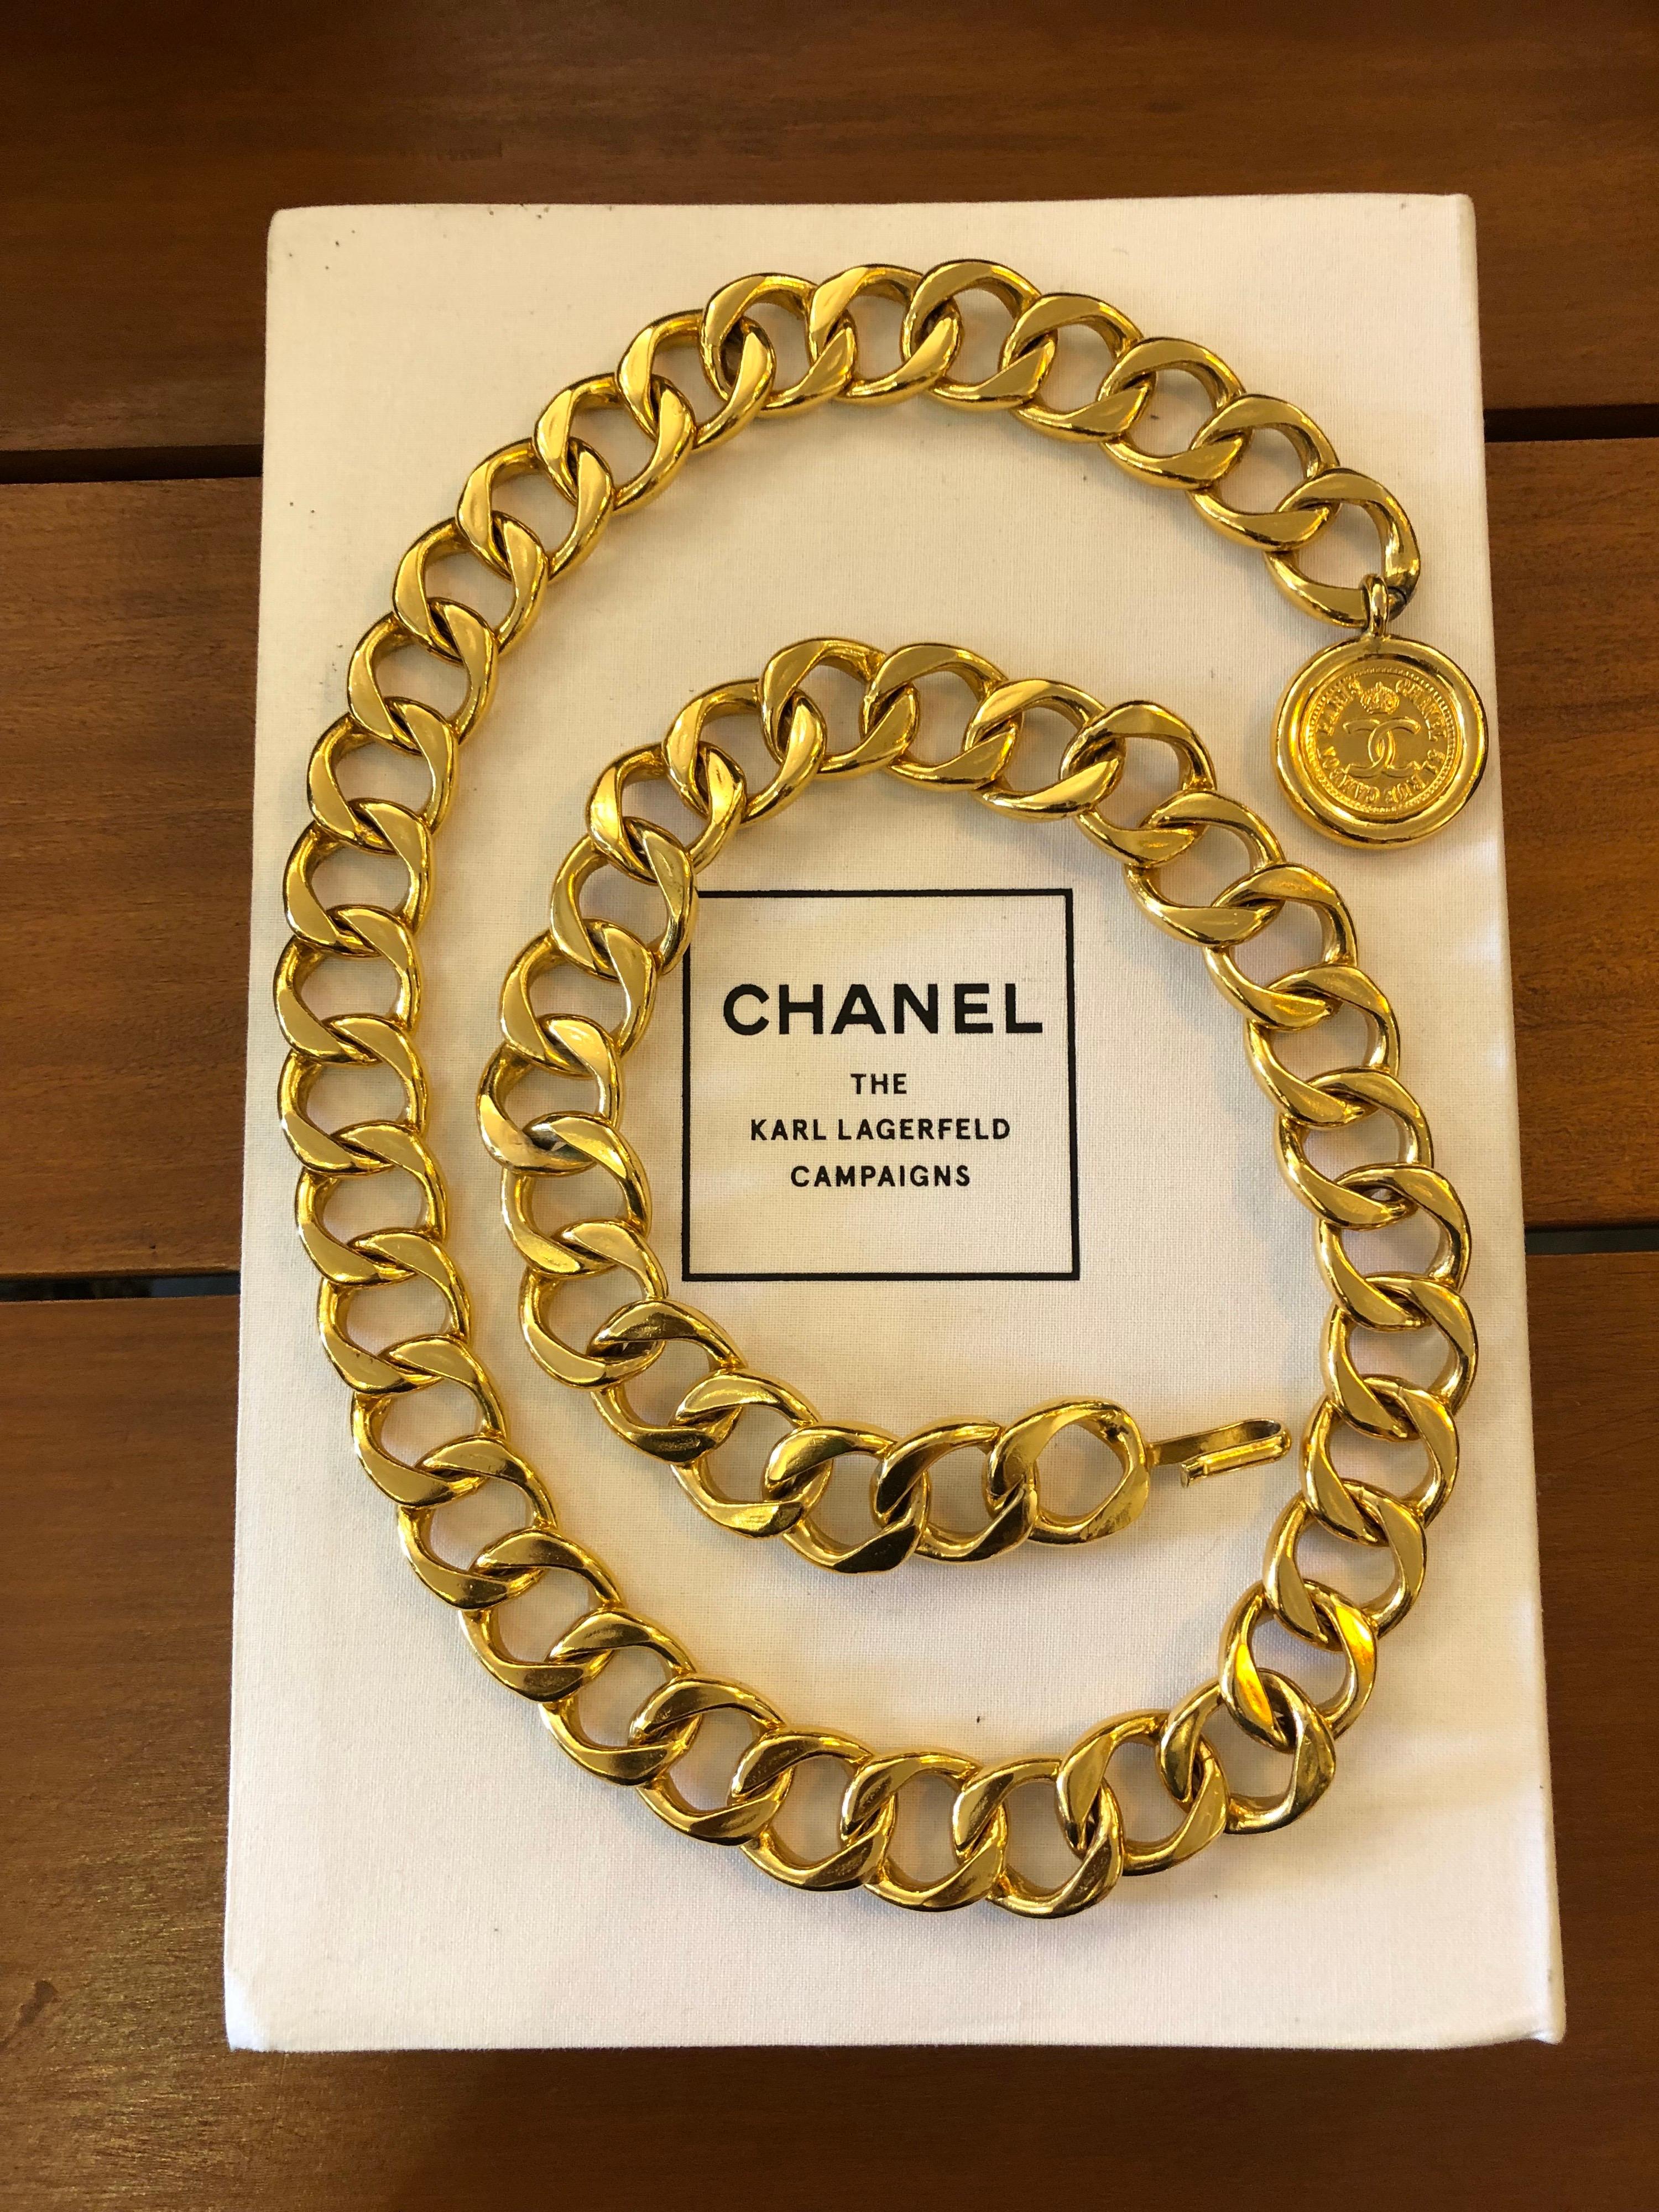 1980s Chanel gold toned CoCo chain belt in chunky chain featuring a gold toned Chanel coin charm. It can be worn as a belt or a statement necklace. Measures approximately 90 cm in length (excl. coin) 2.3 cm in width. Stamped CHANEL.

Condition: